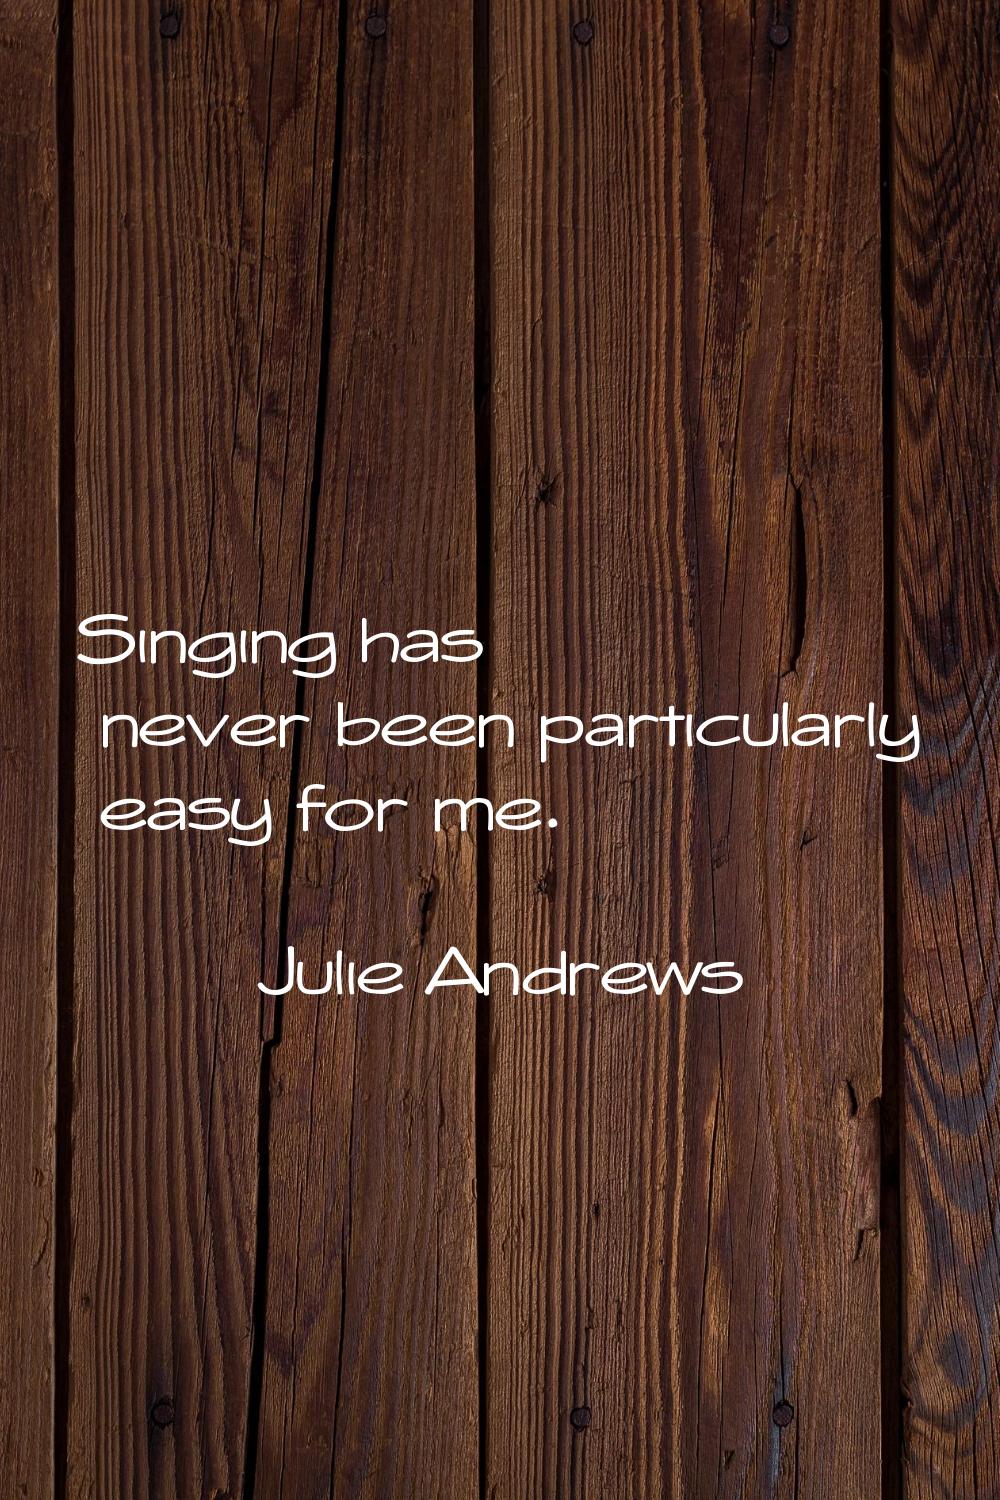 Singing has never been particularly easy for me.